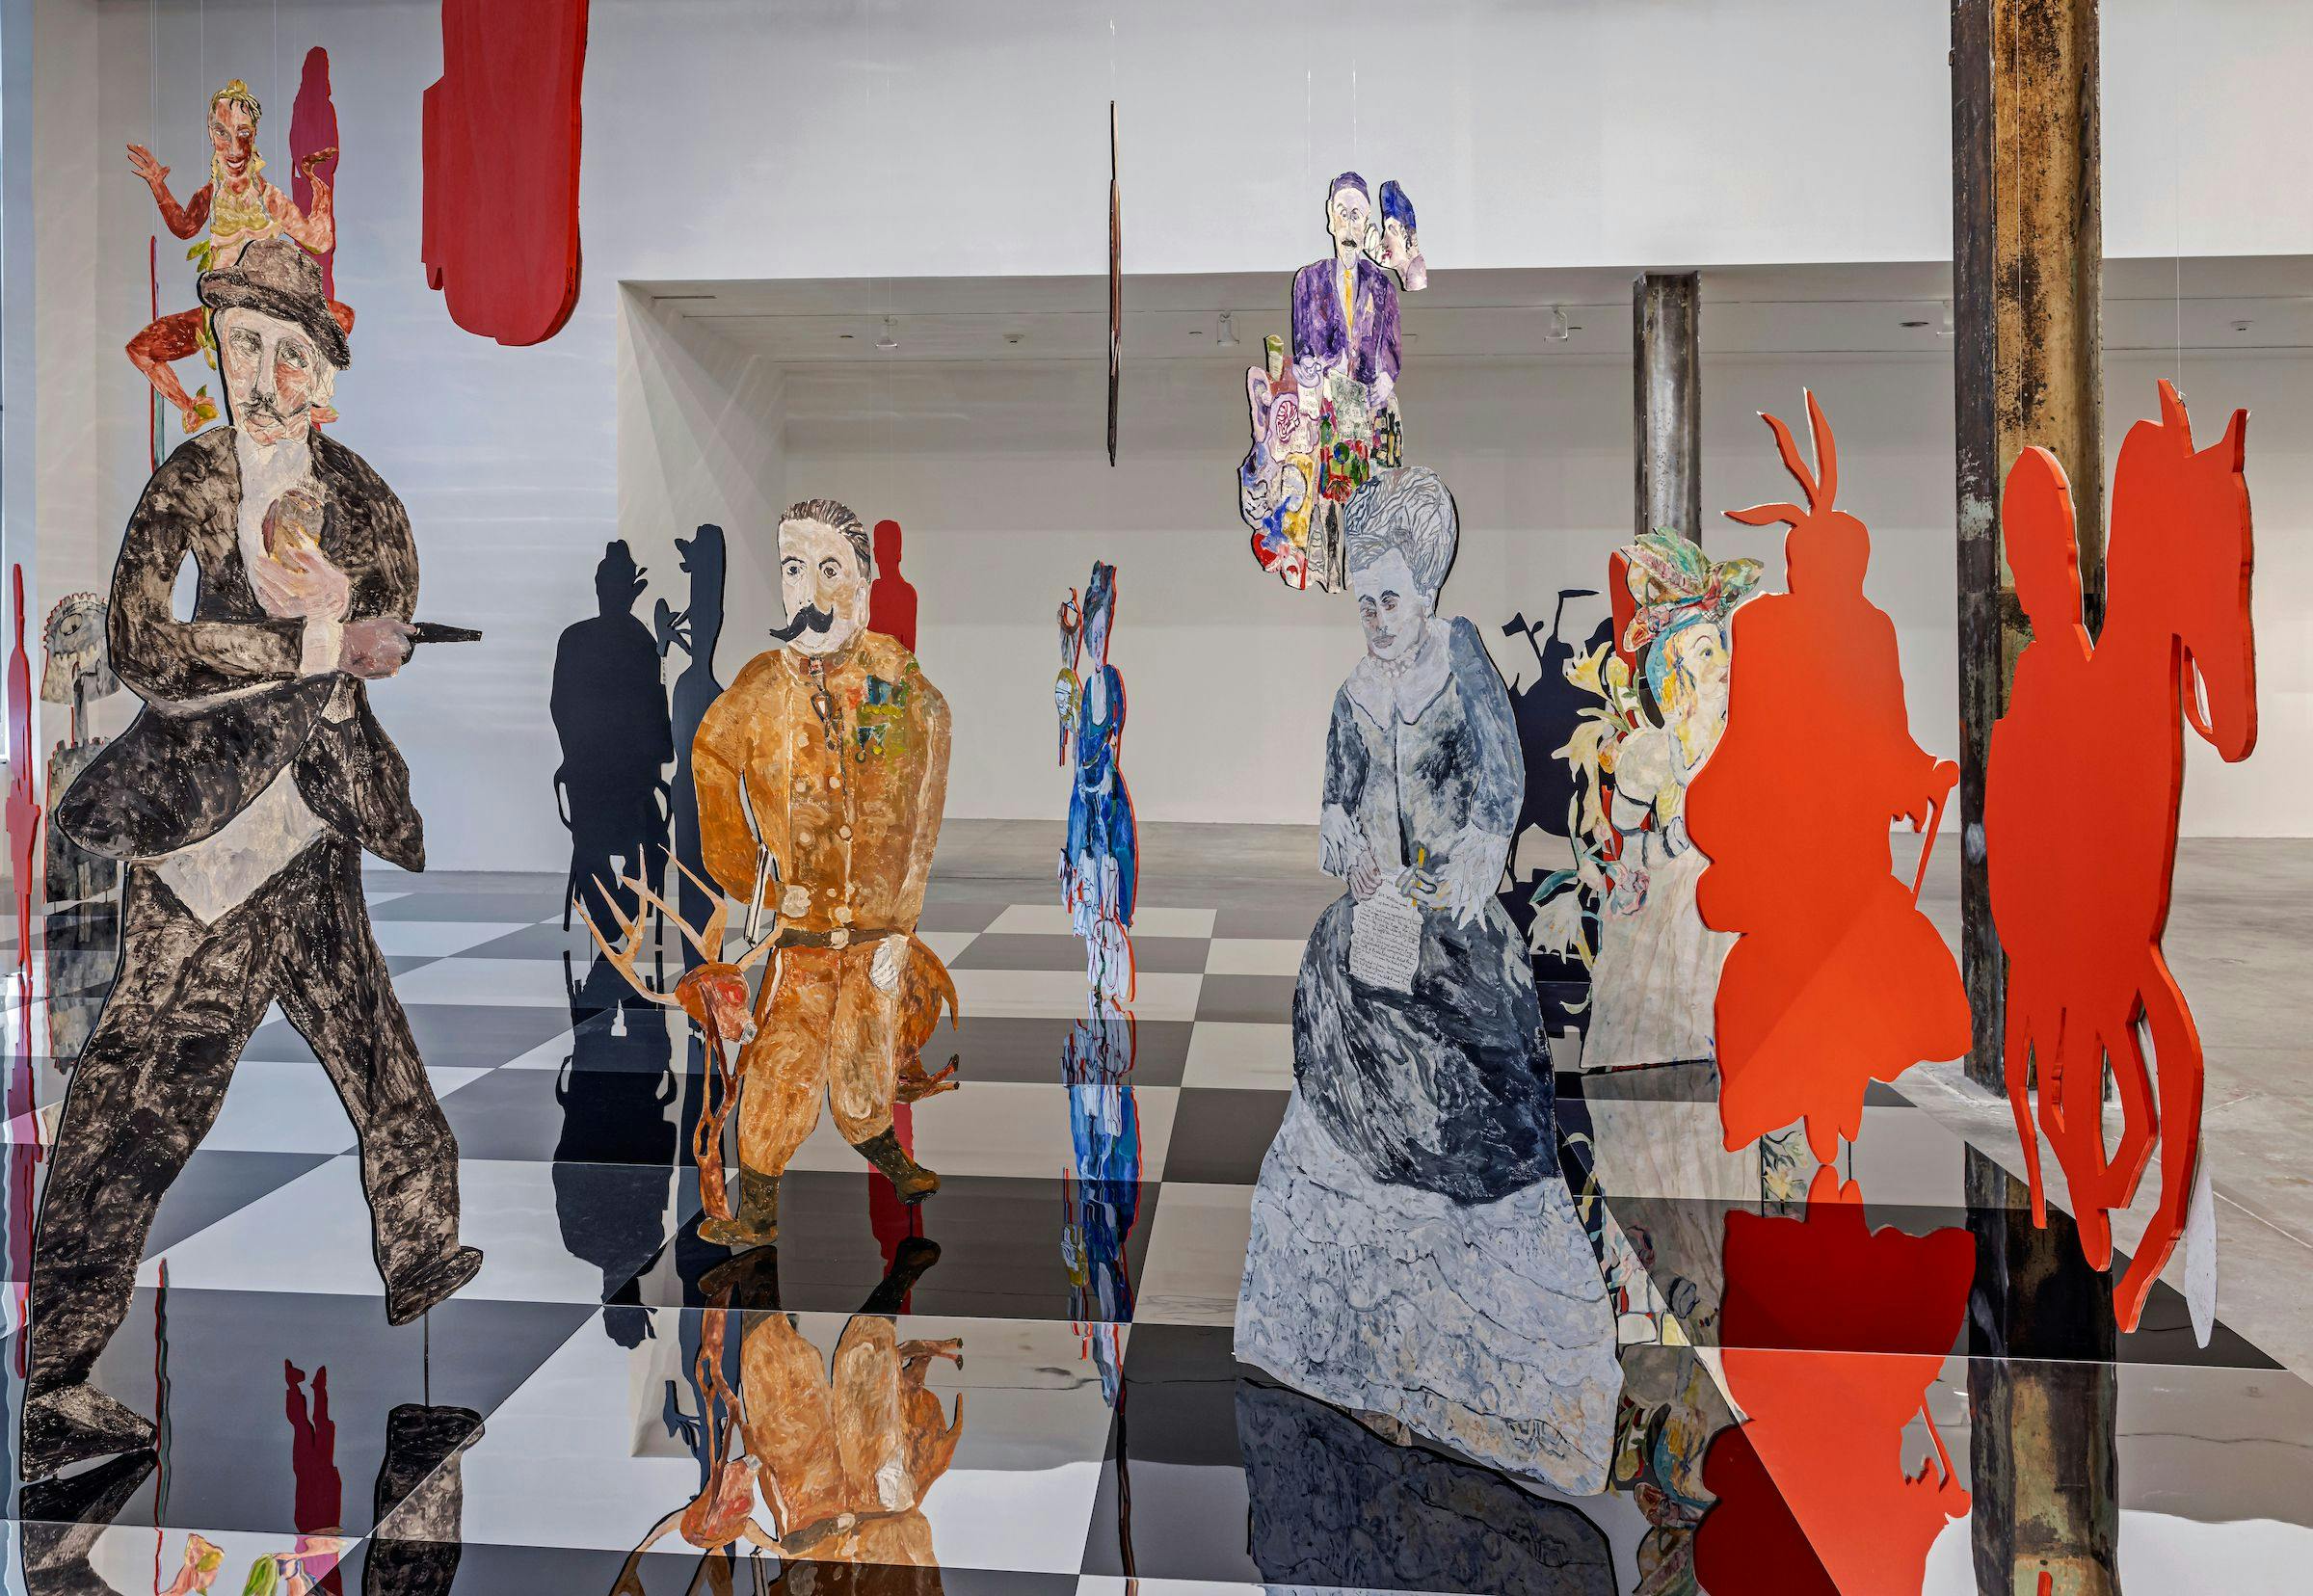 Anna Boghiguian, The Chess Game, 2022-23. Encaustic on Khadi paper, wood, acrylic panels, and mirror-coated Plexiglass. Ten chess pieces produced especially for the exhibition at The Power Plant, Toronto. Courtesy the artist. Photo: Toni Hafkenscheid.